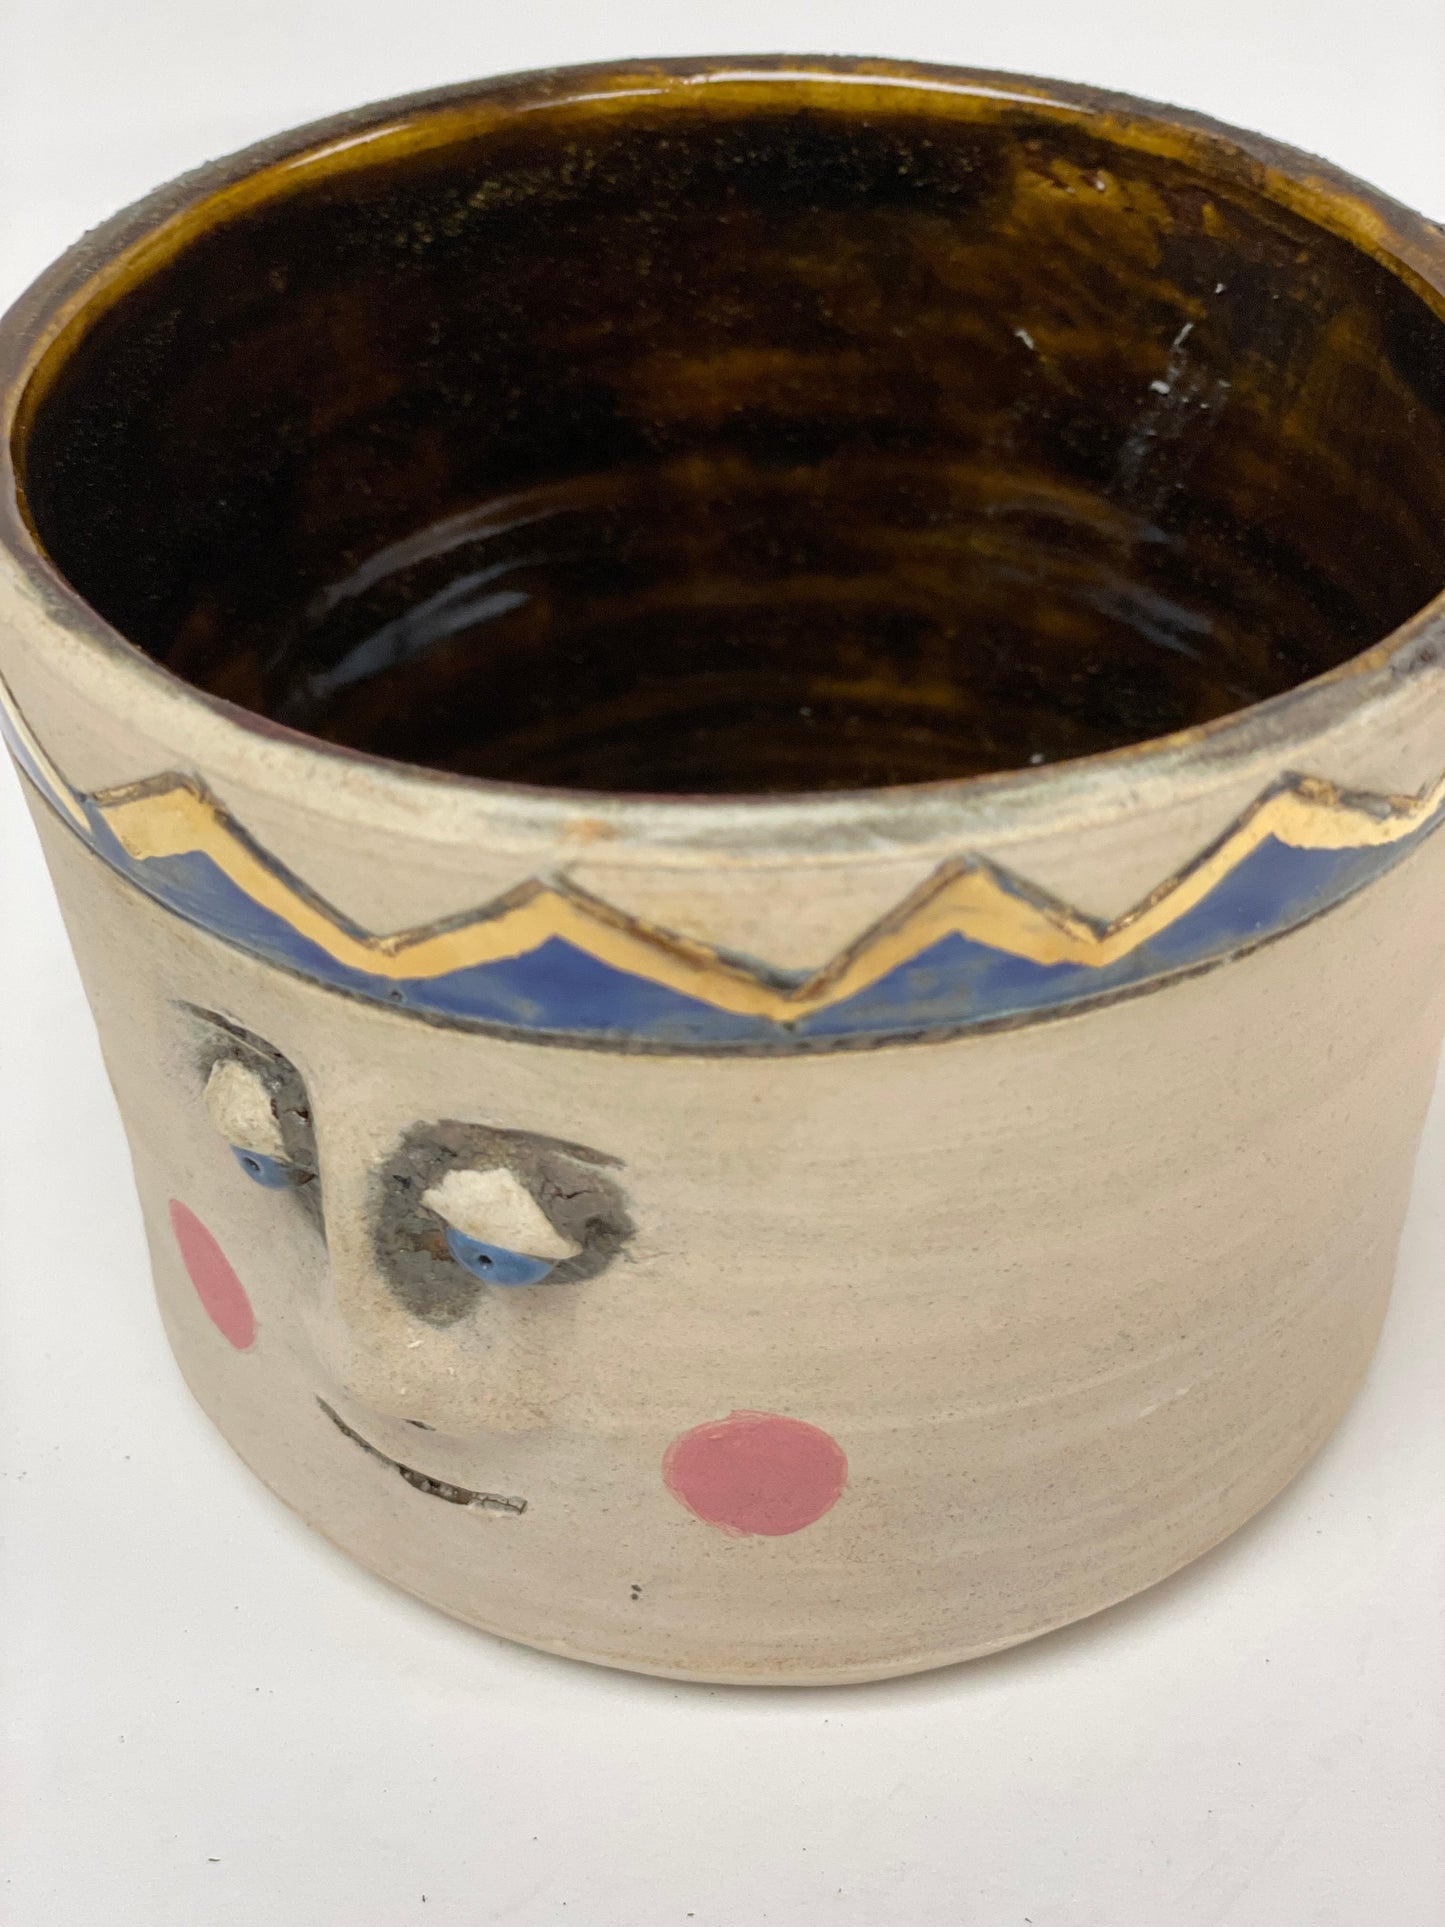 Pottery, Hand-made, Planter, with Face - Pottery Gold Trim, succulents, Gift, Drainage Hole, cute, whimsical,4.5 diameter, 3.25" deep